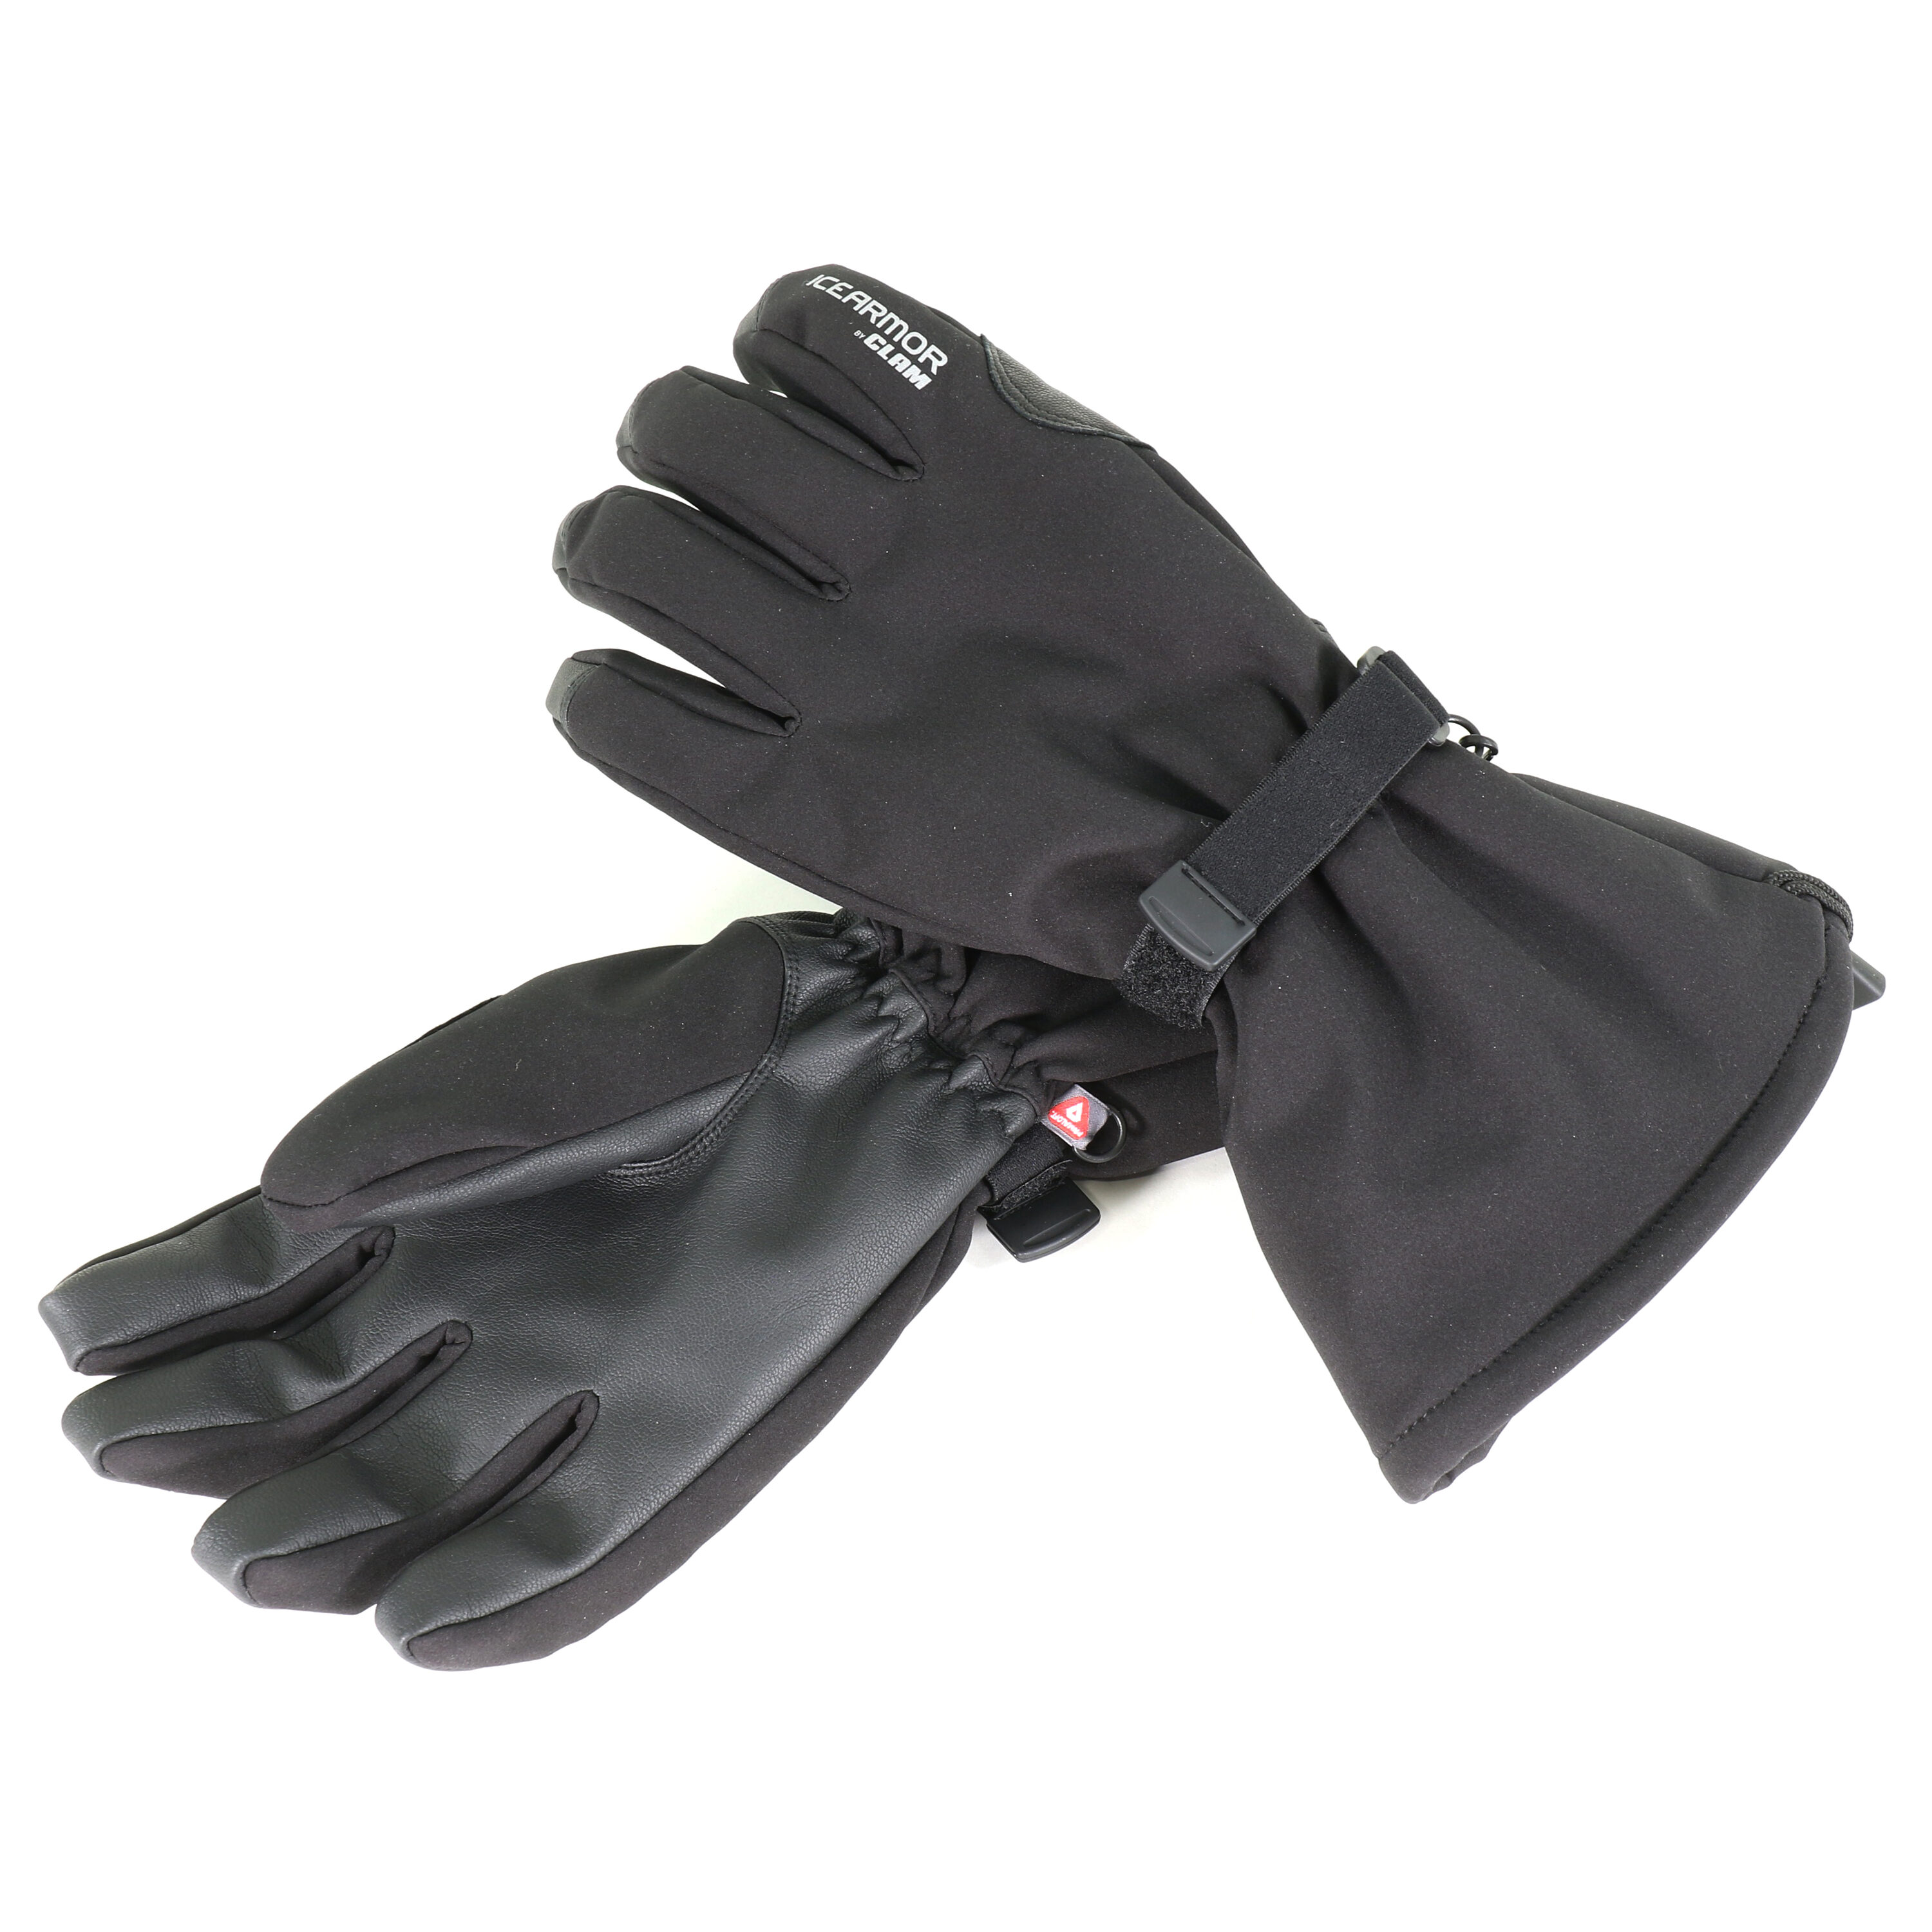 Clam Outdoors Extreme Ice Fishing Glove - Med in the Fishing Gear & Apparel  department at